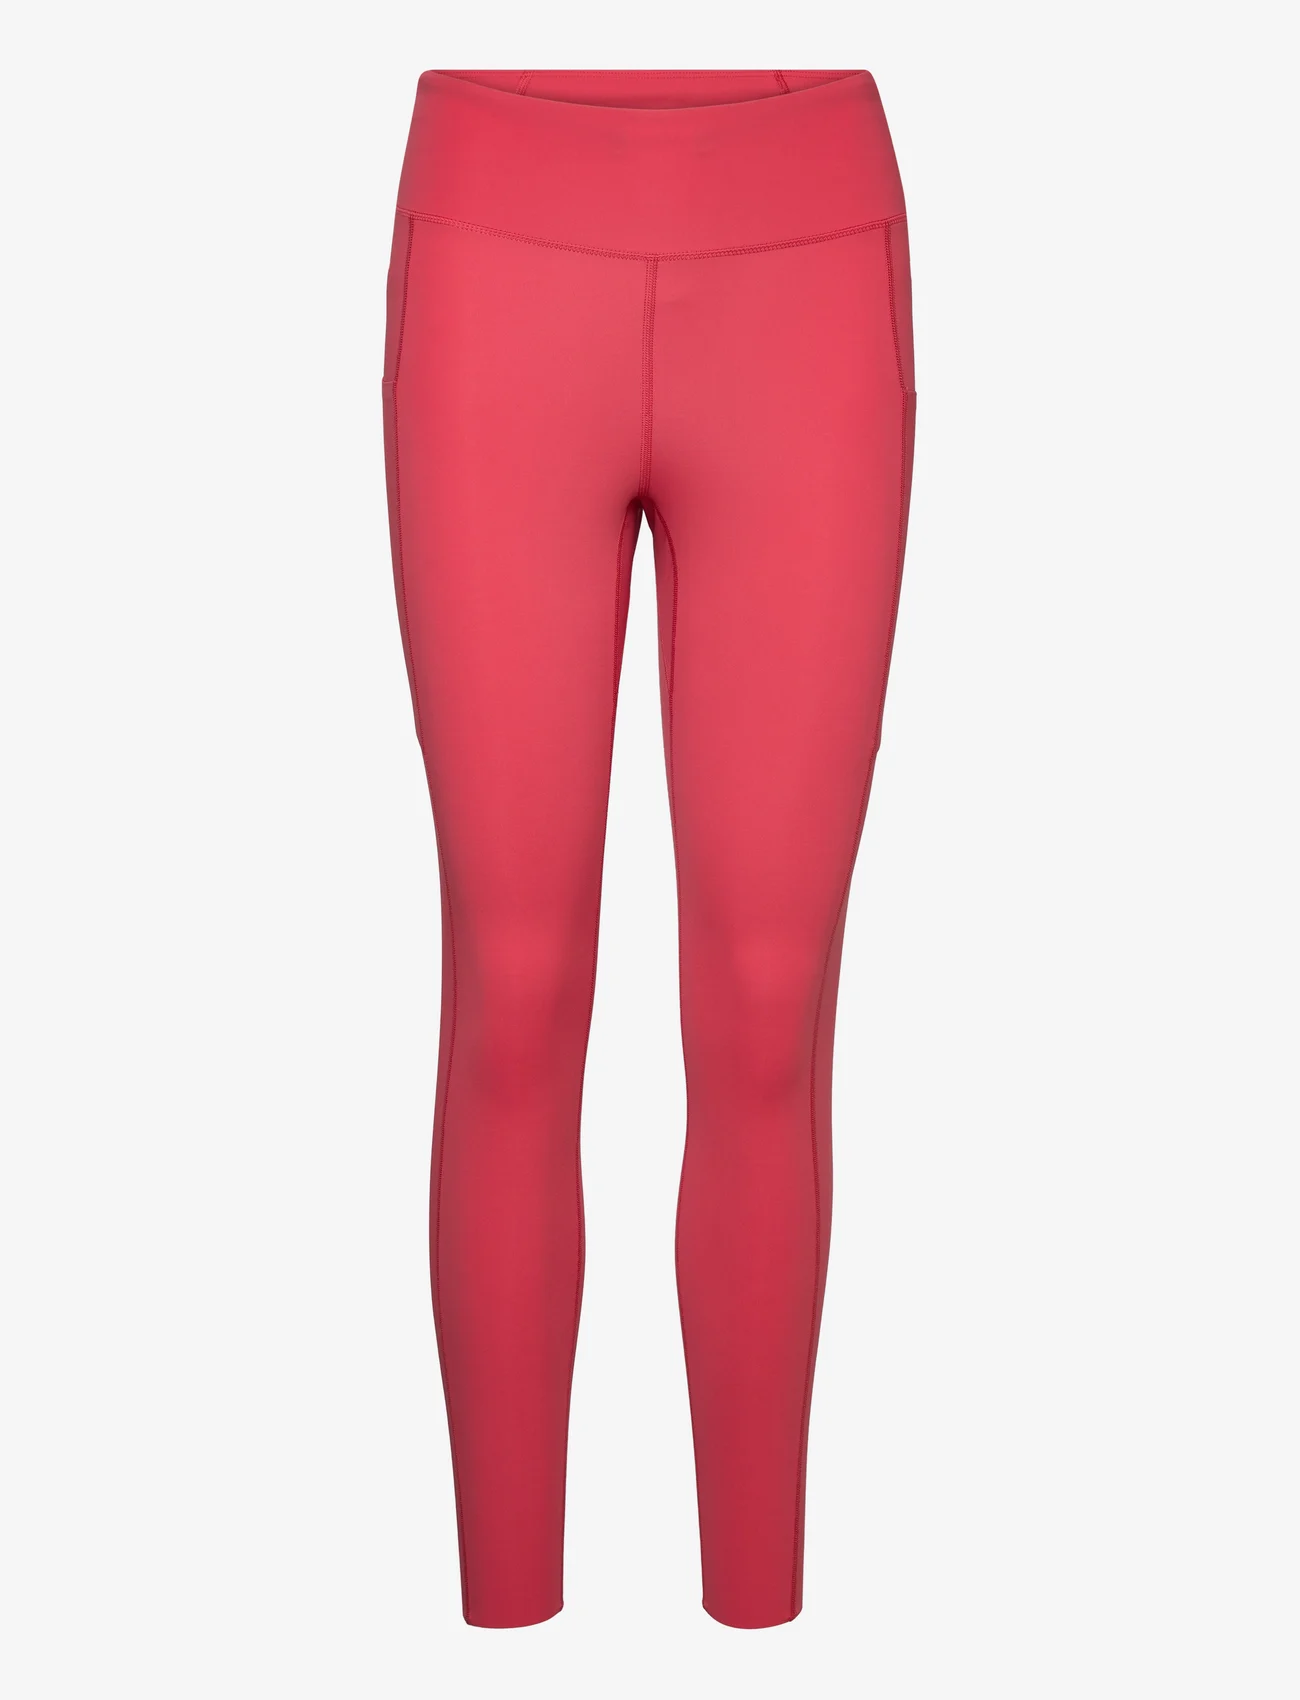 Peak Performance - W Power Tights-SOFTER RED - lauf-& trainingstights - softer red - 0